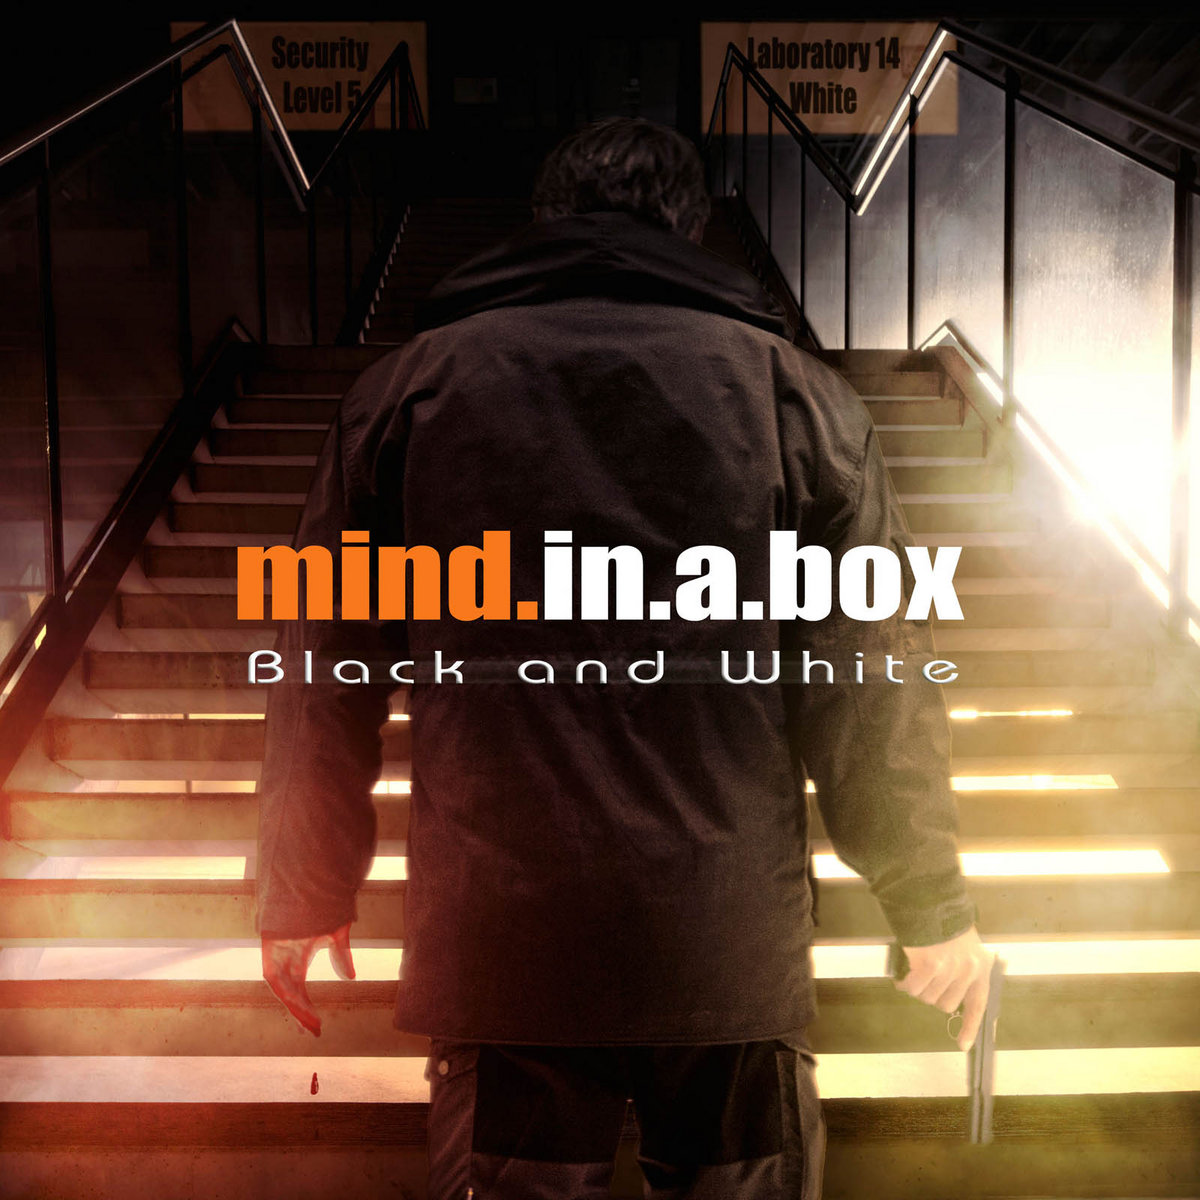 mind.in.a.box, “Black And White”